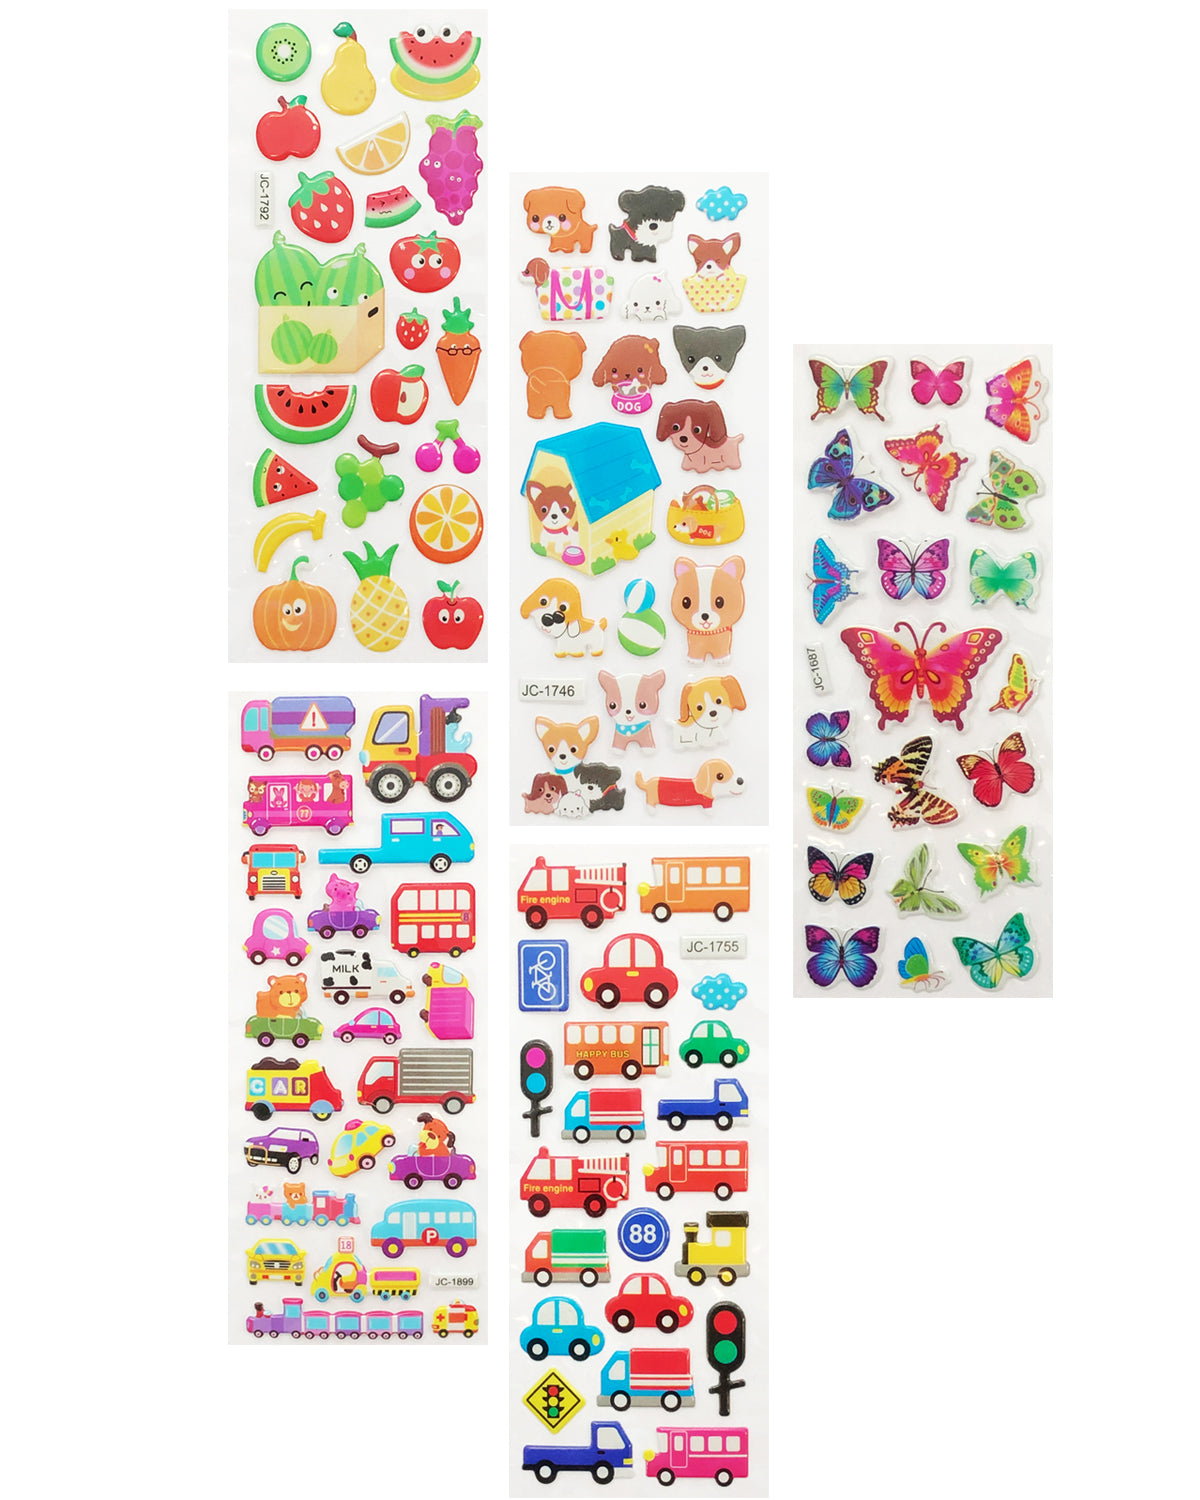 New Designs Puffy 3D Bubble Stickers for Scrapbooking DIY / Deco